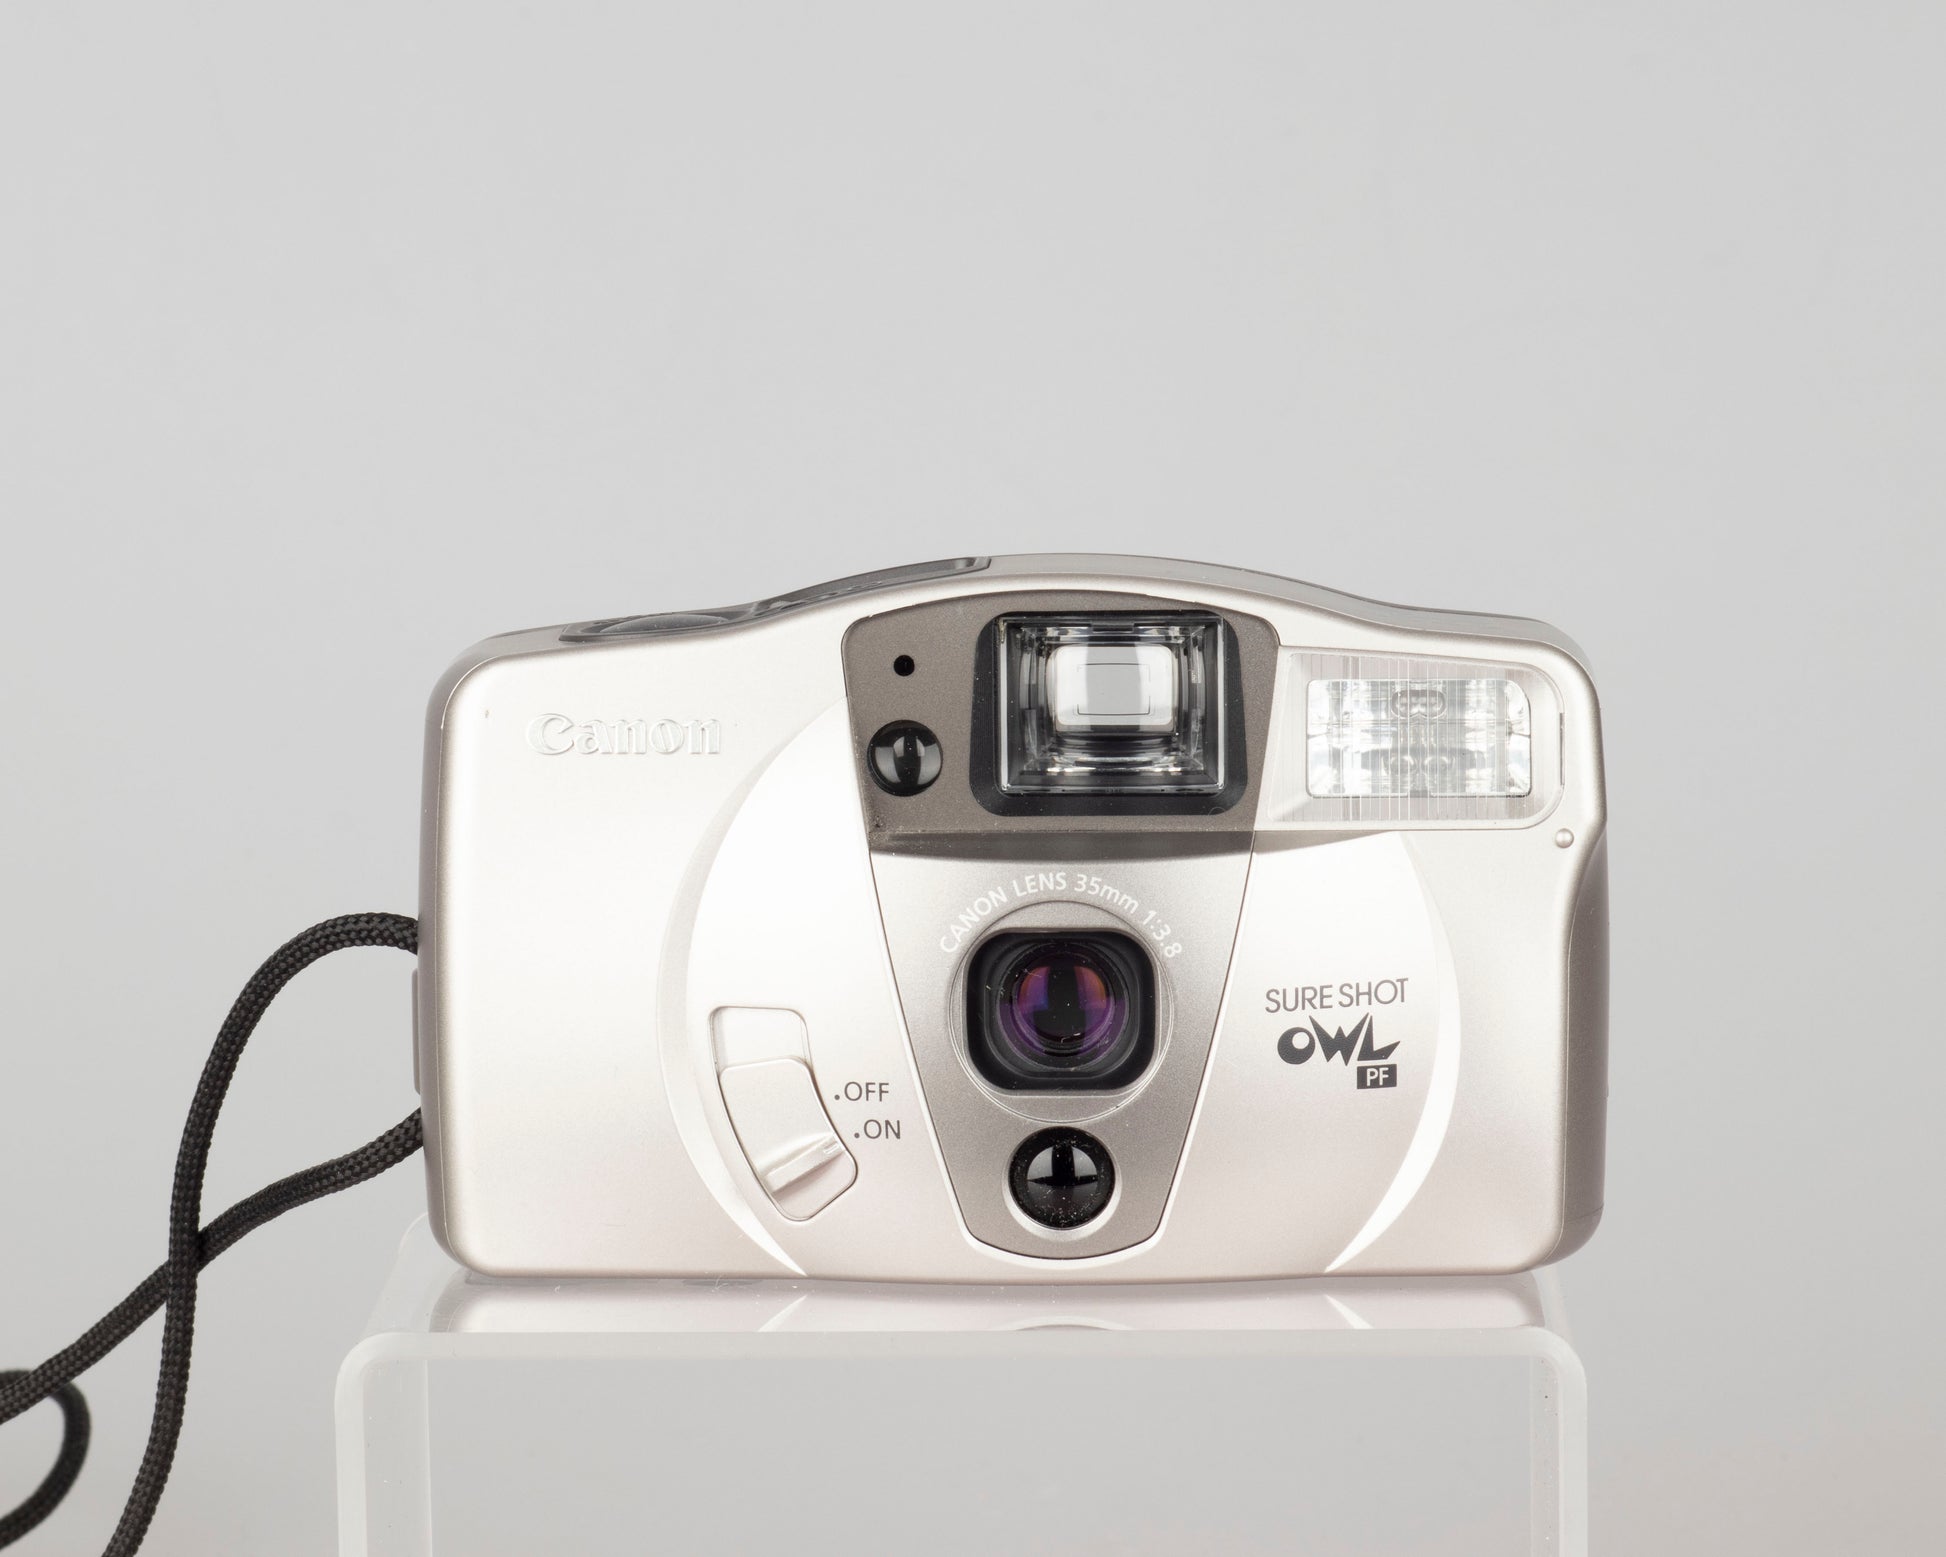 The Canon Sure Shot Owl is an easy-to-use autofocus 35mm point-and-shoot from the early aughts with a large, bright viewfinder.